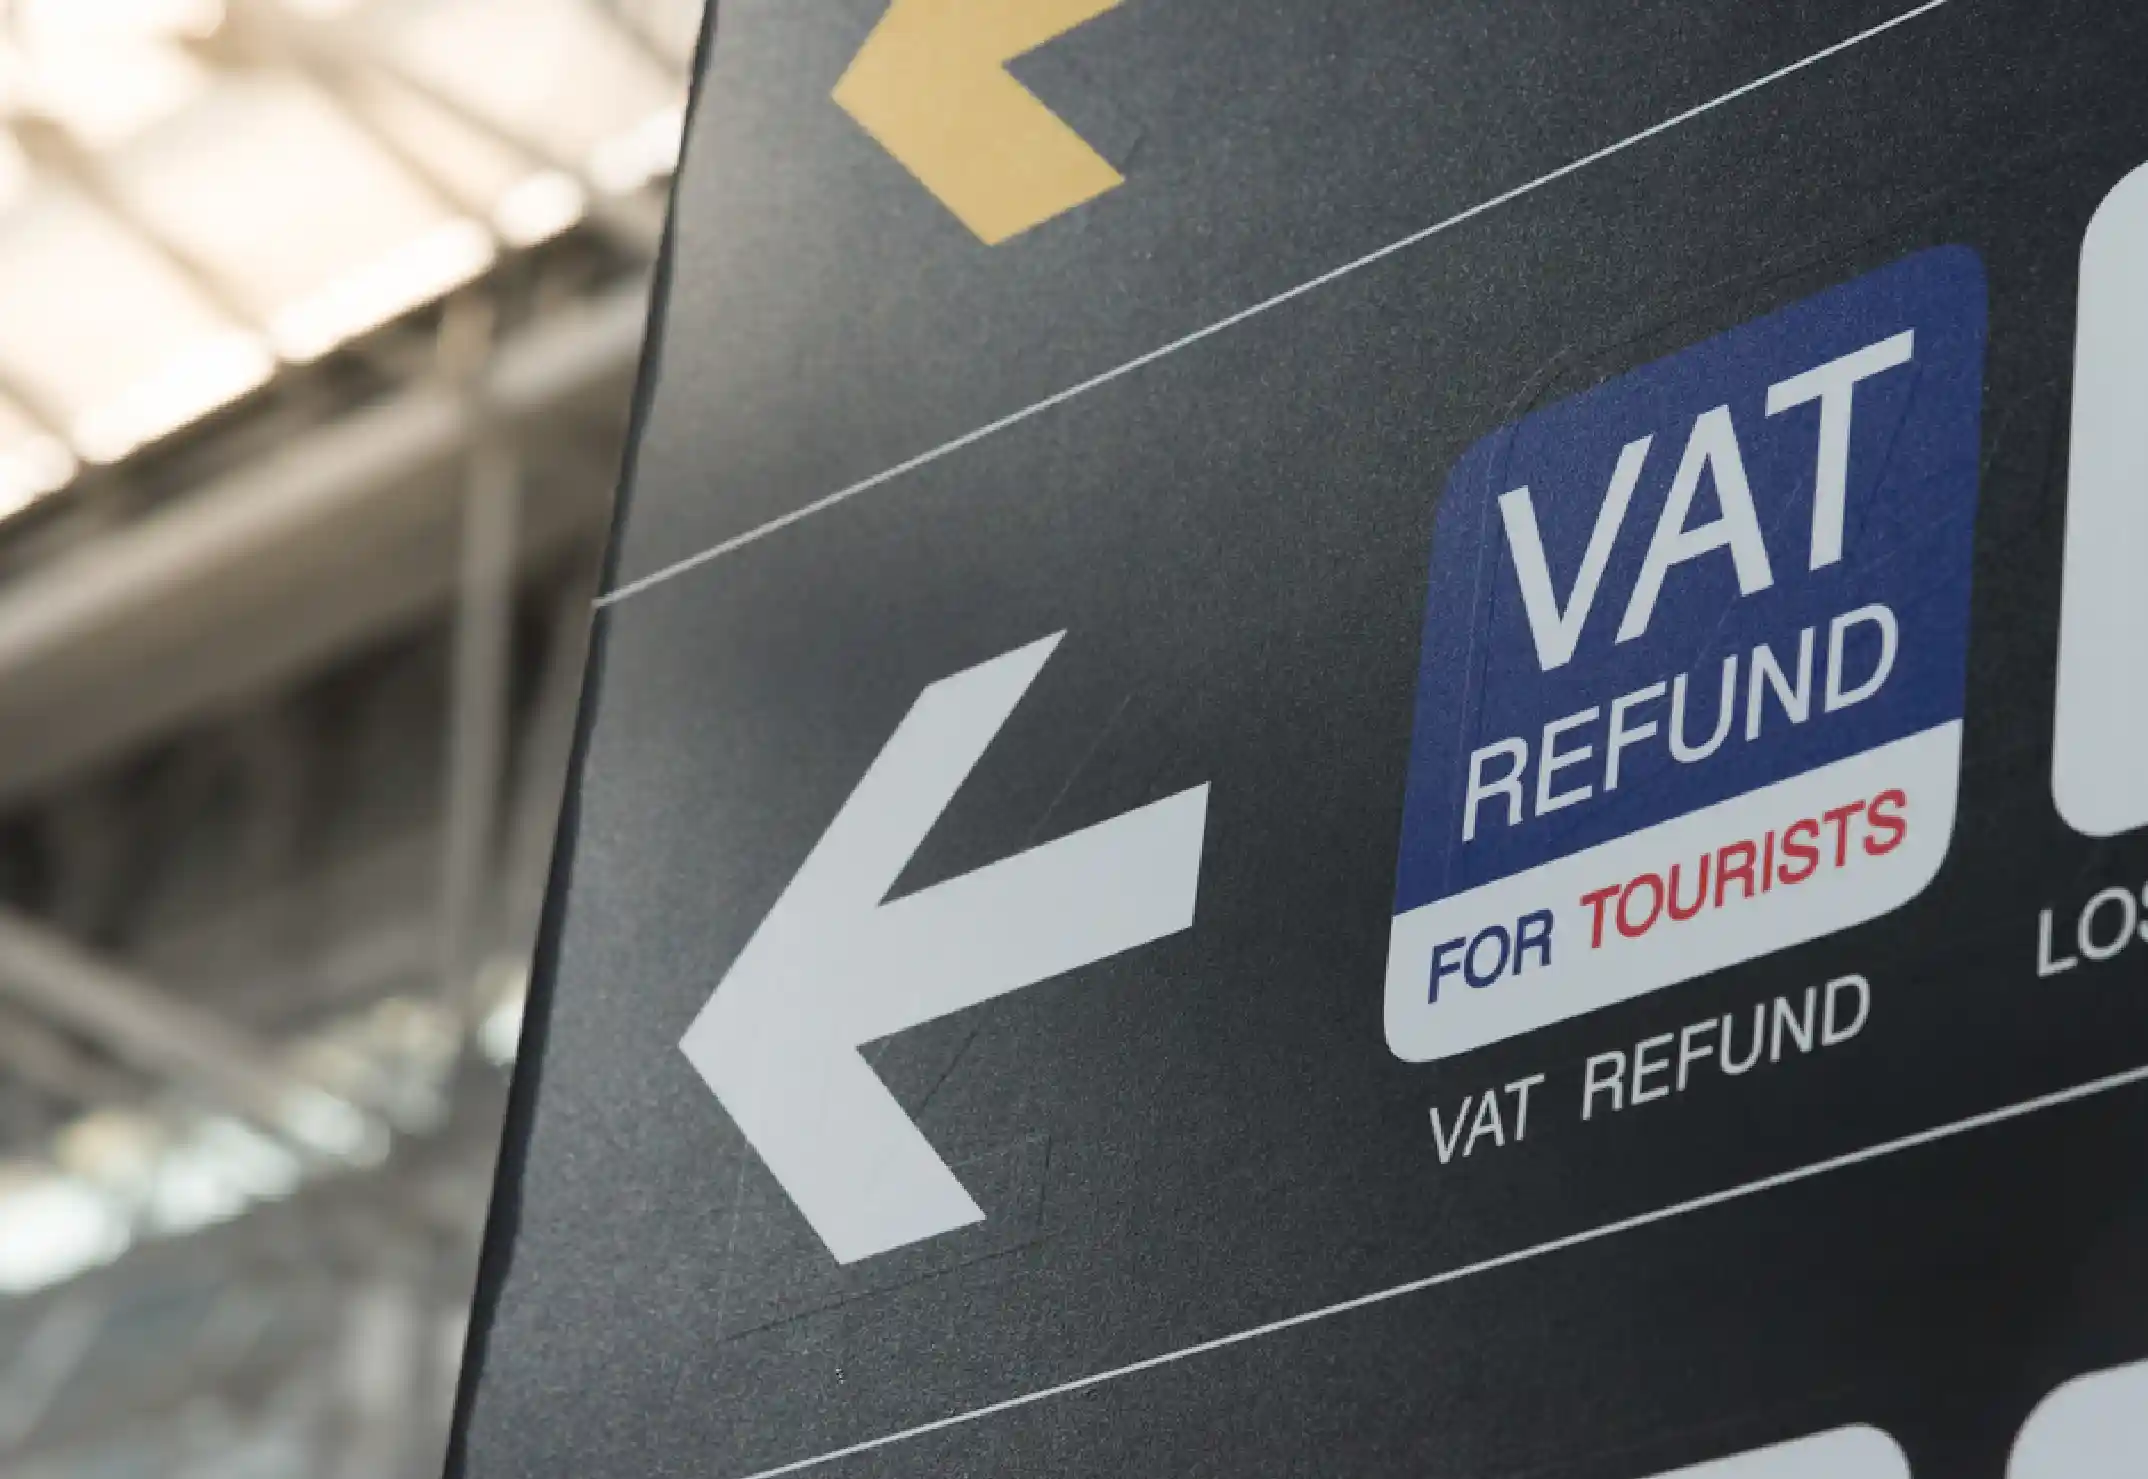 #Step-by-Step Guide, #VAT Refund at the Airport